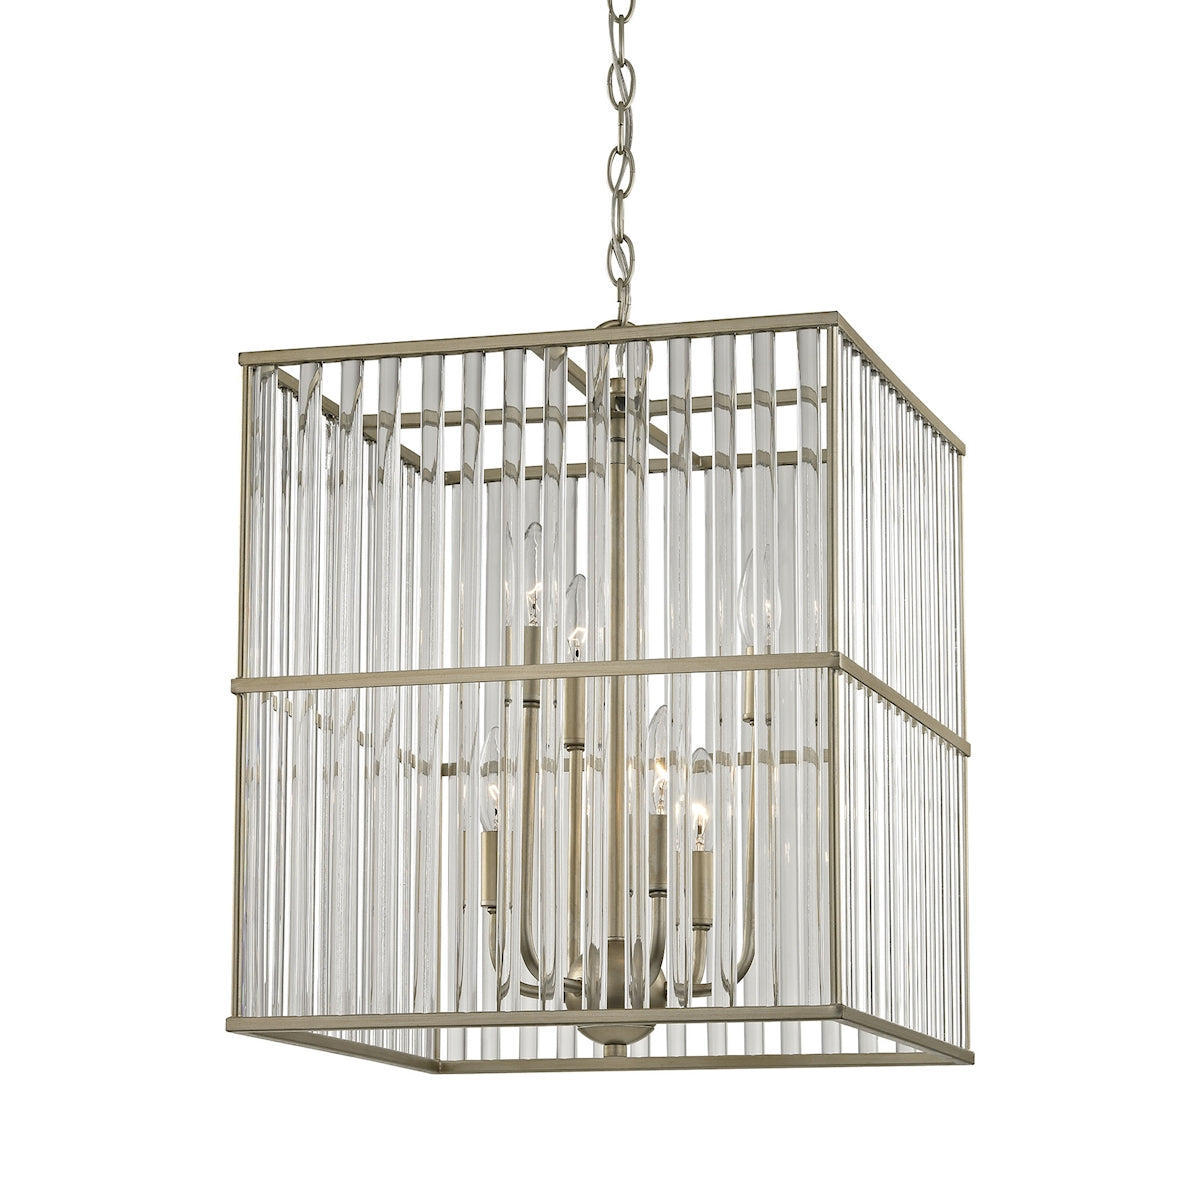 ELK Lighting 81097/6 Ridley 6-Light Chandelier in Aged Silver with Oval Glass Rods